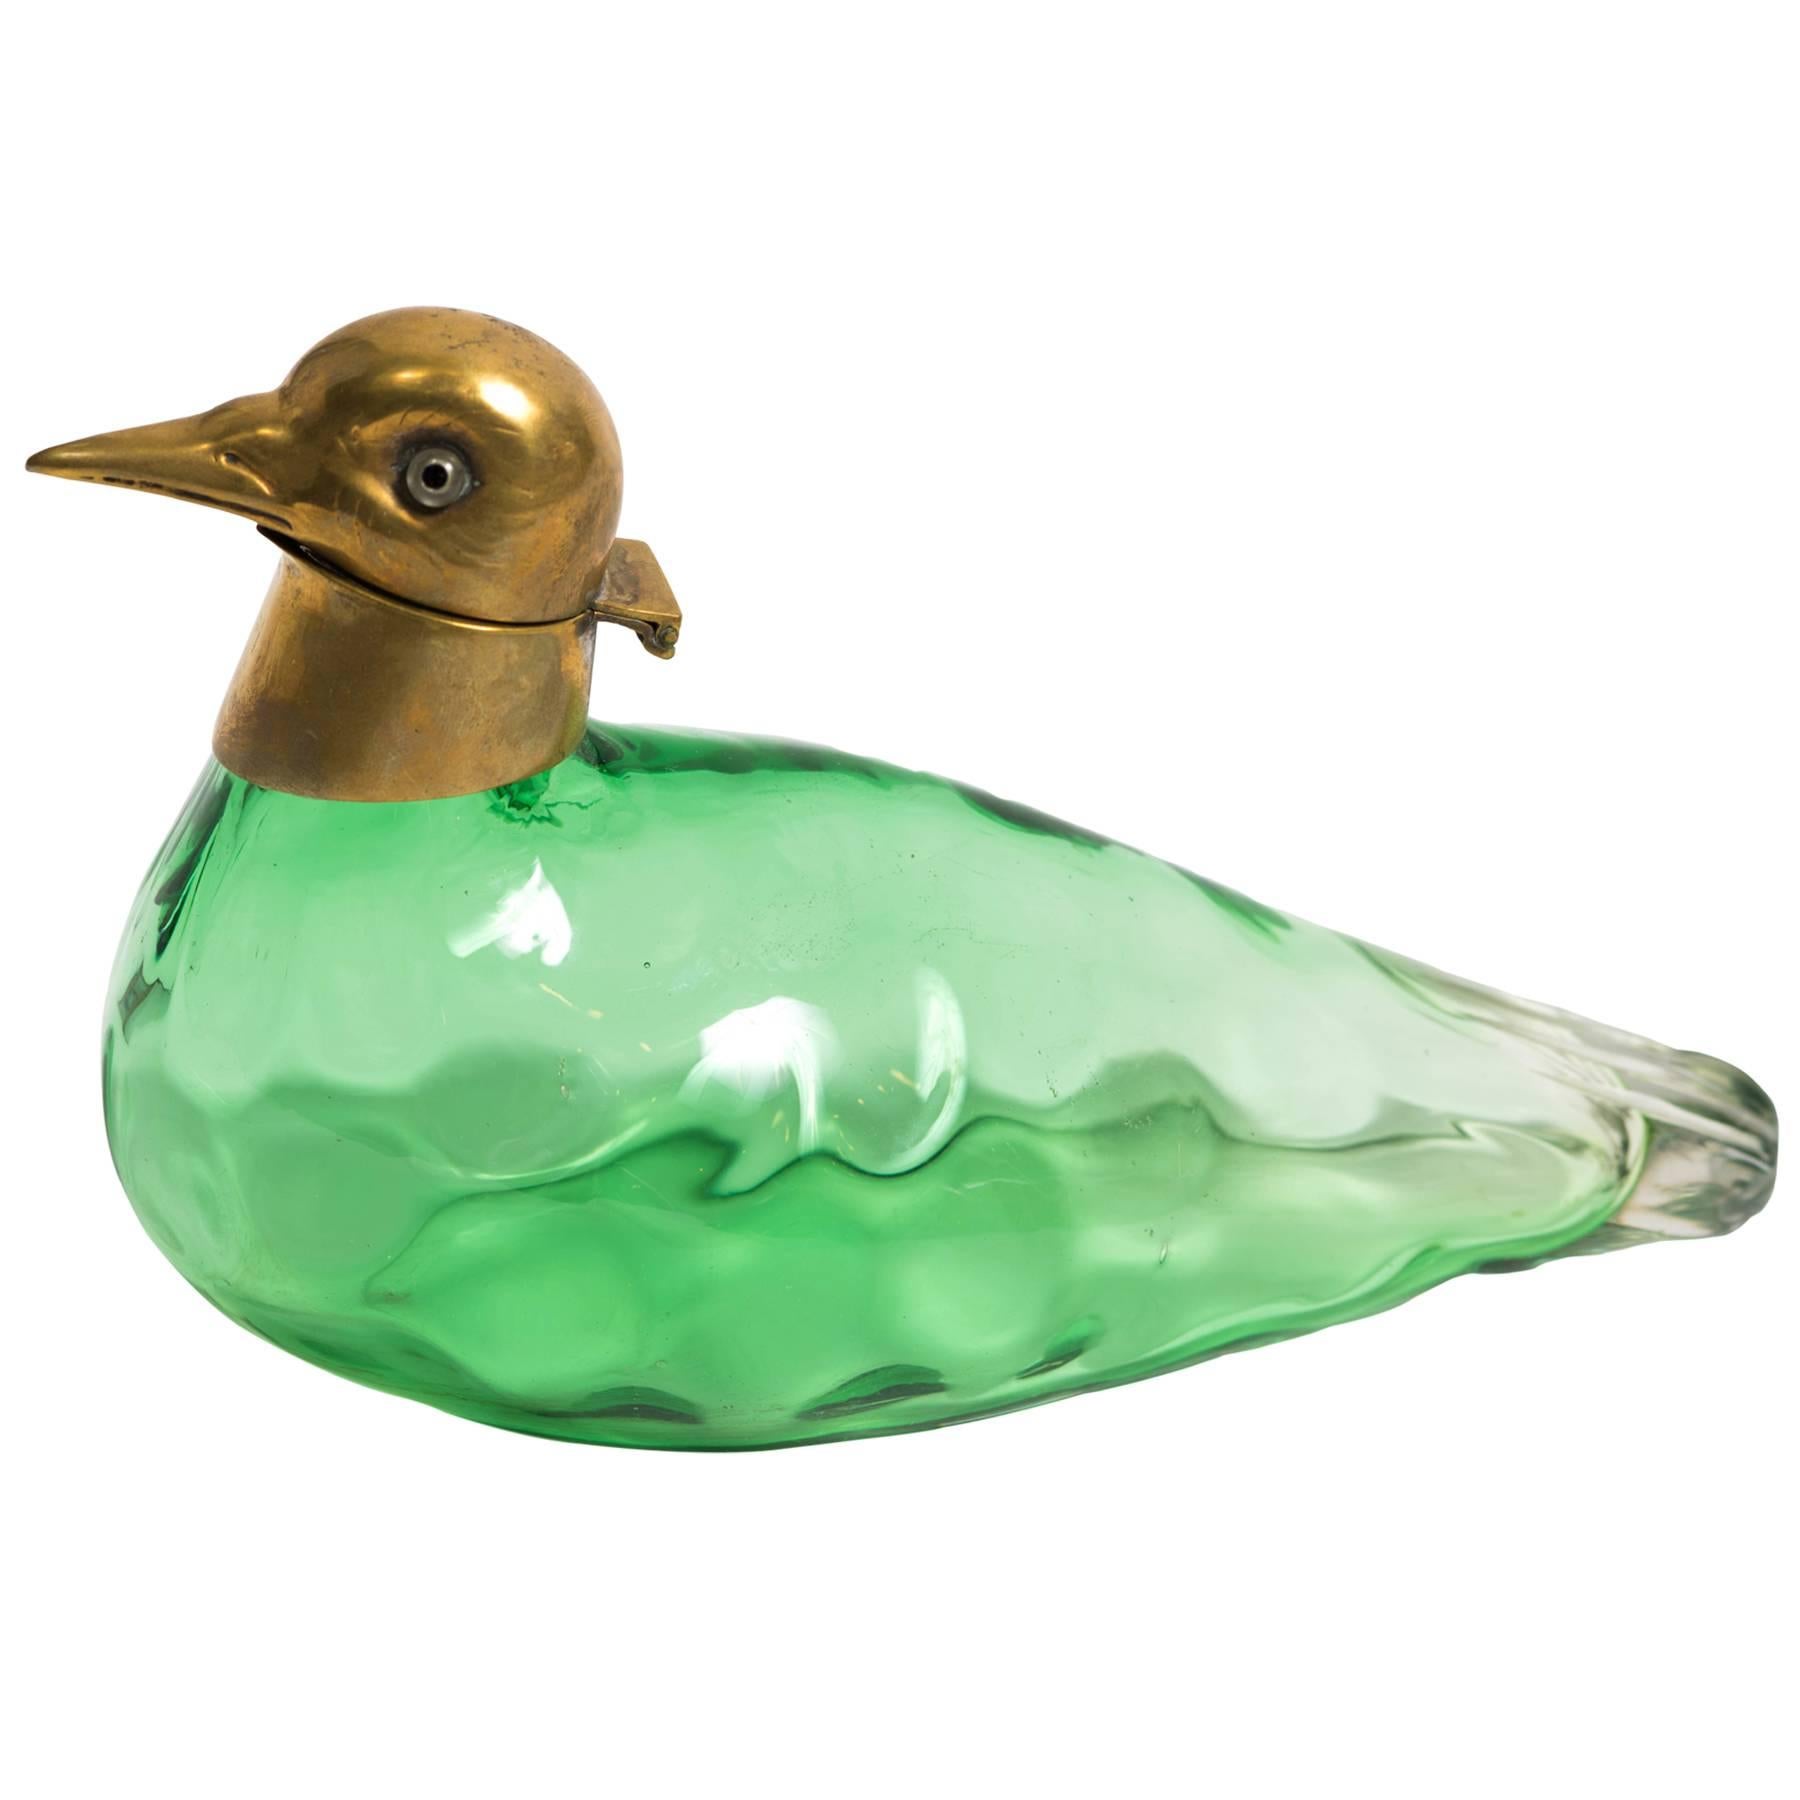 Austrian glass avian perfume bottle from the turn of the Century. Includes original stopper. Has glass eyes.